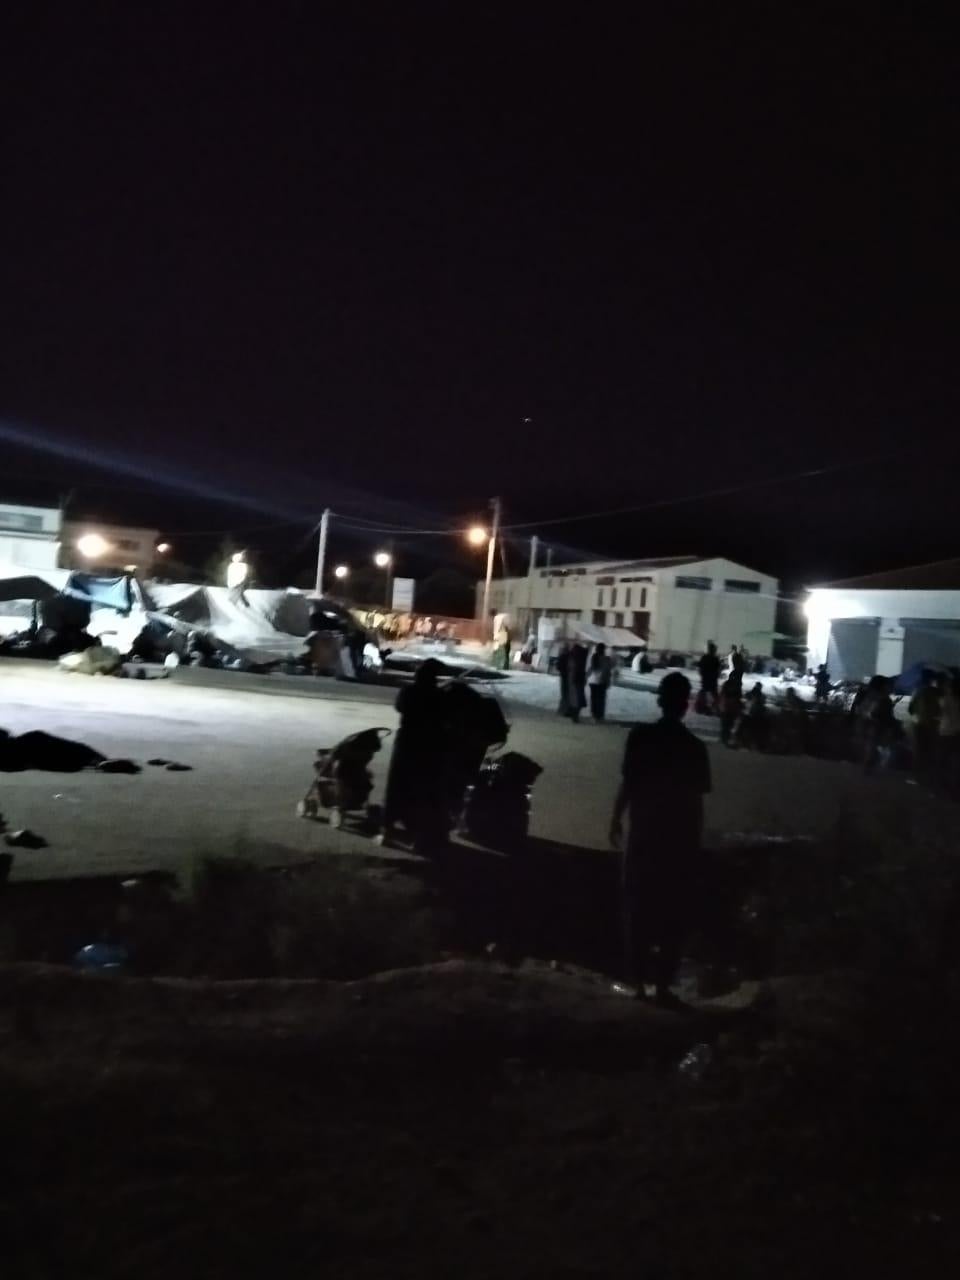 A refugee camp at night